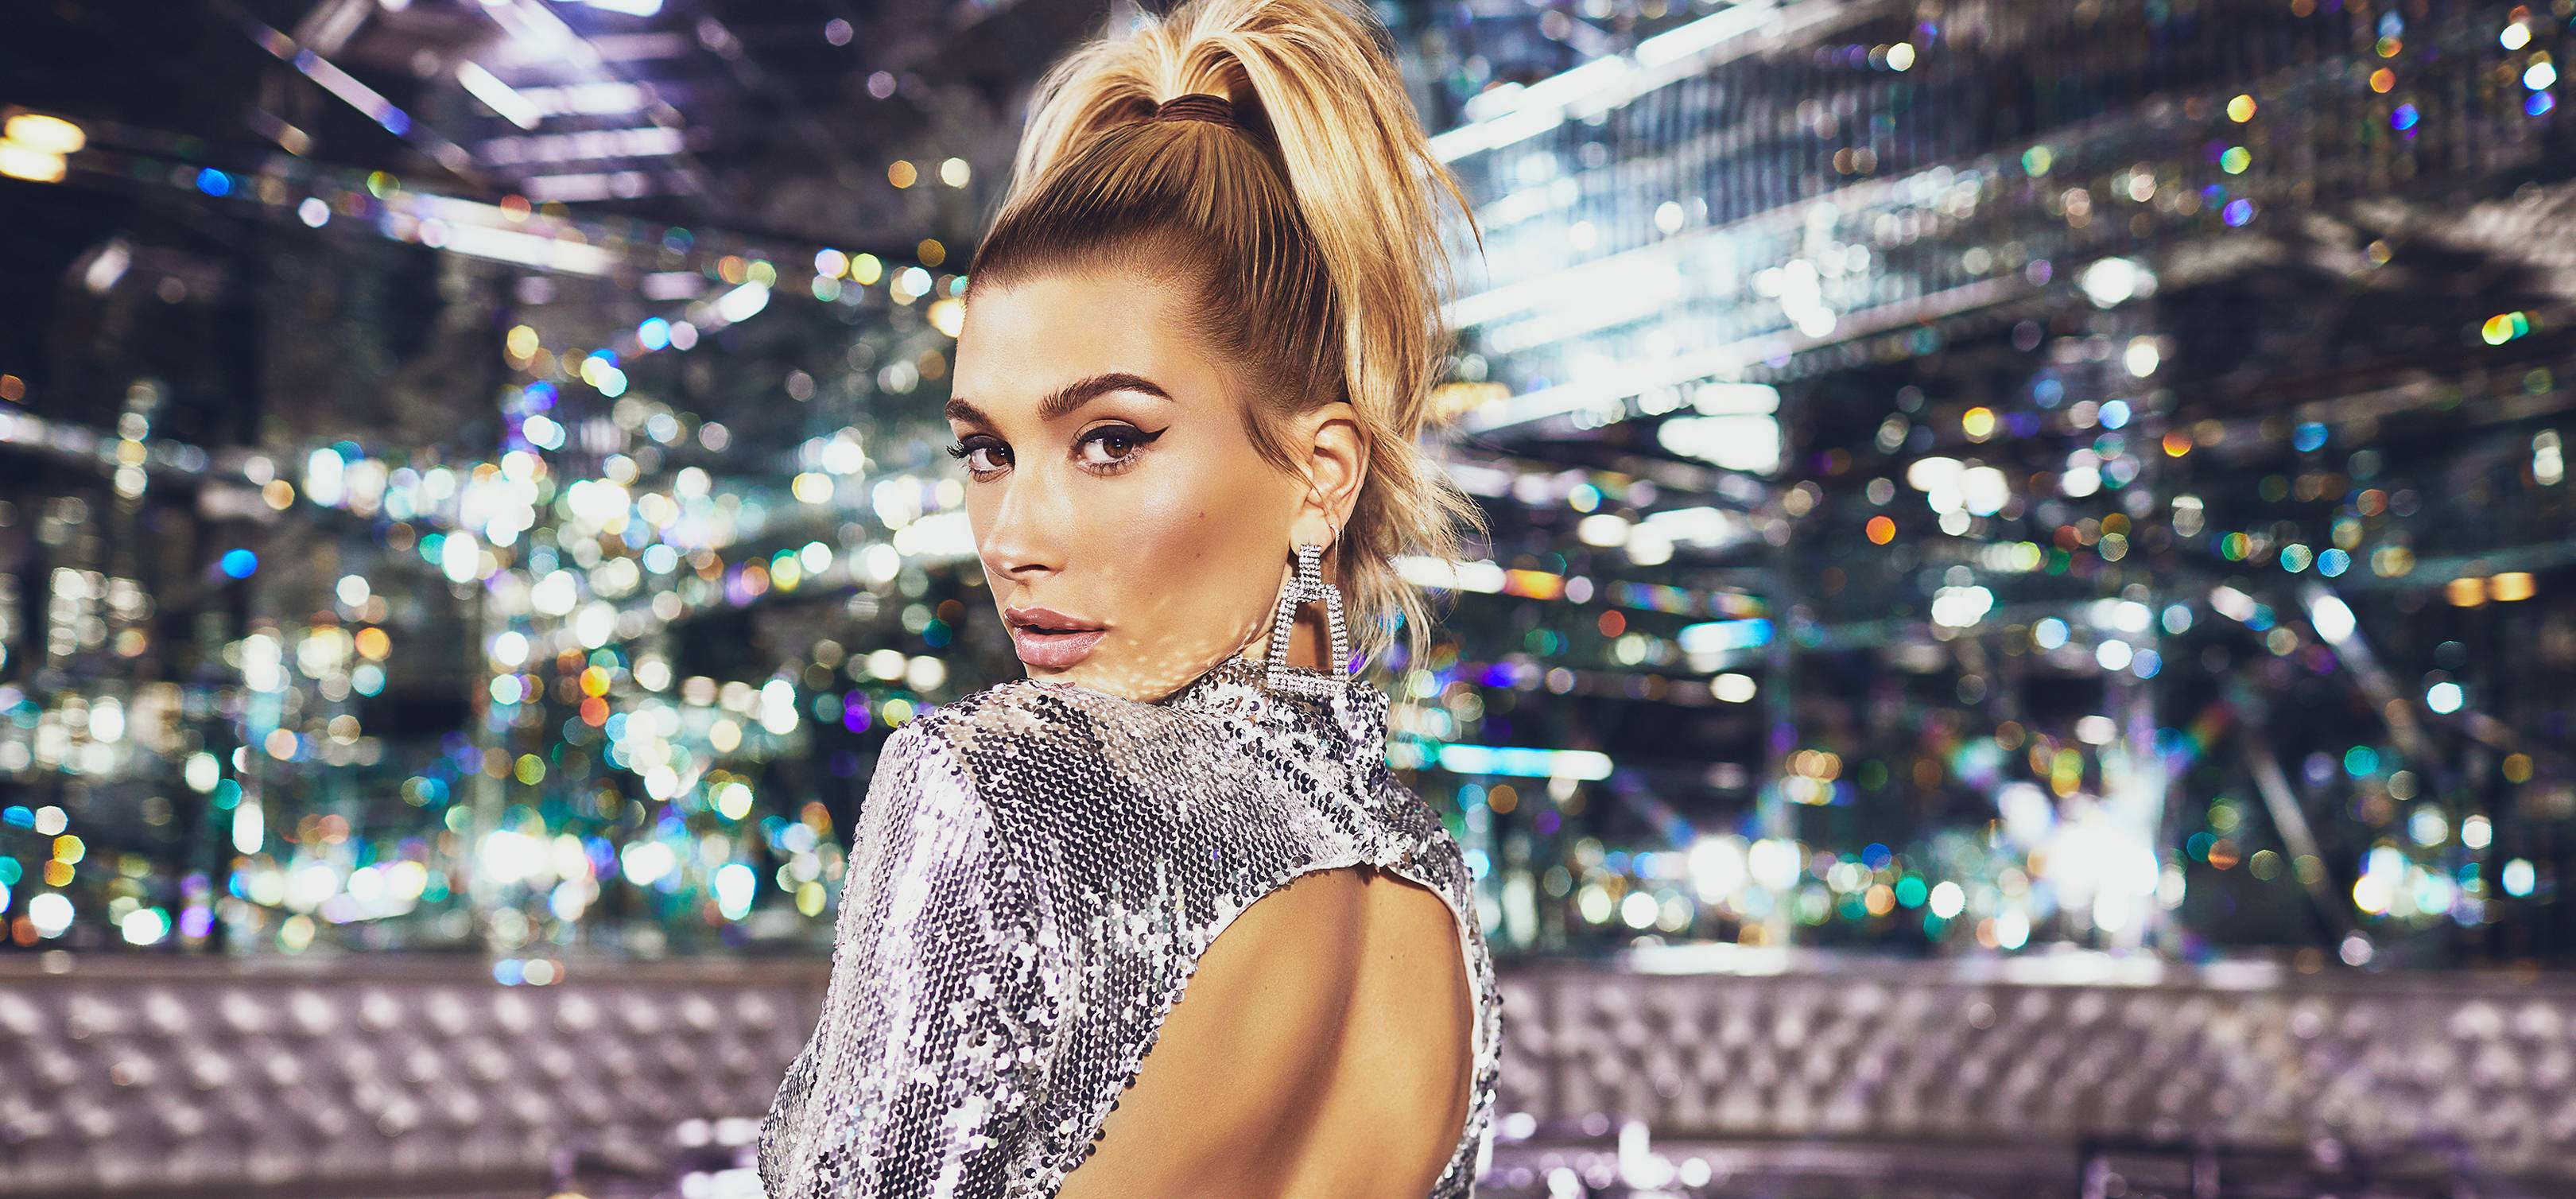 Hailey Baldwin Becomes Face Of Prettylittlethingcom And